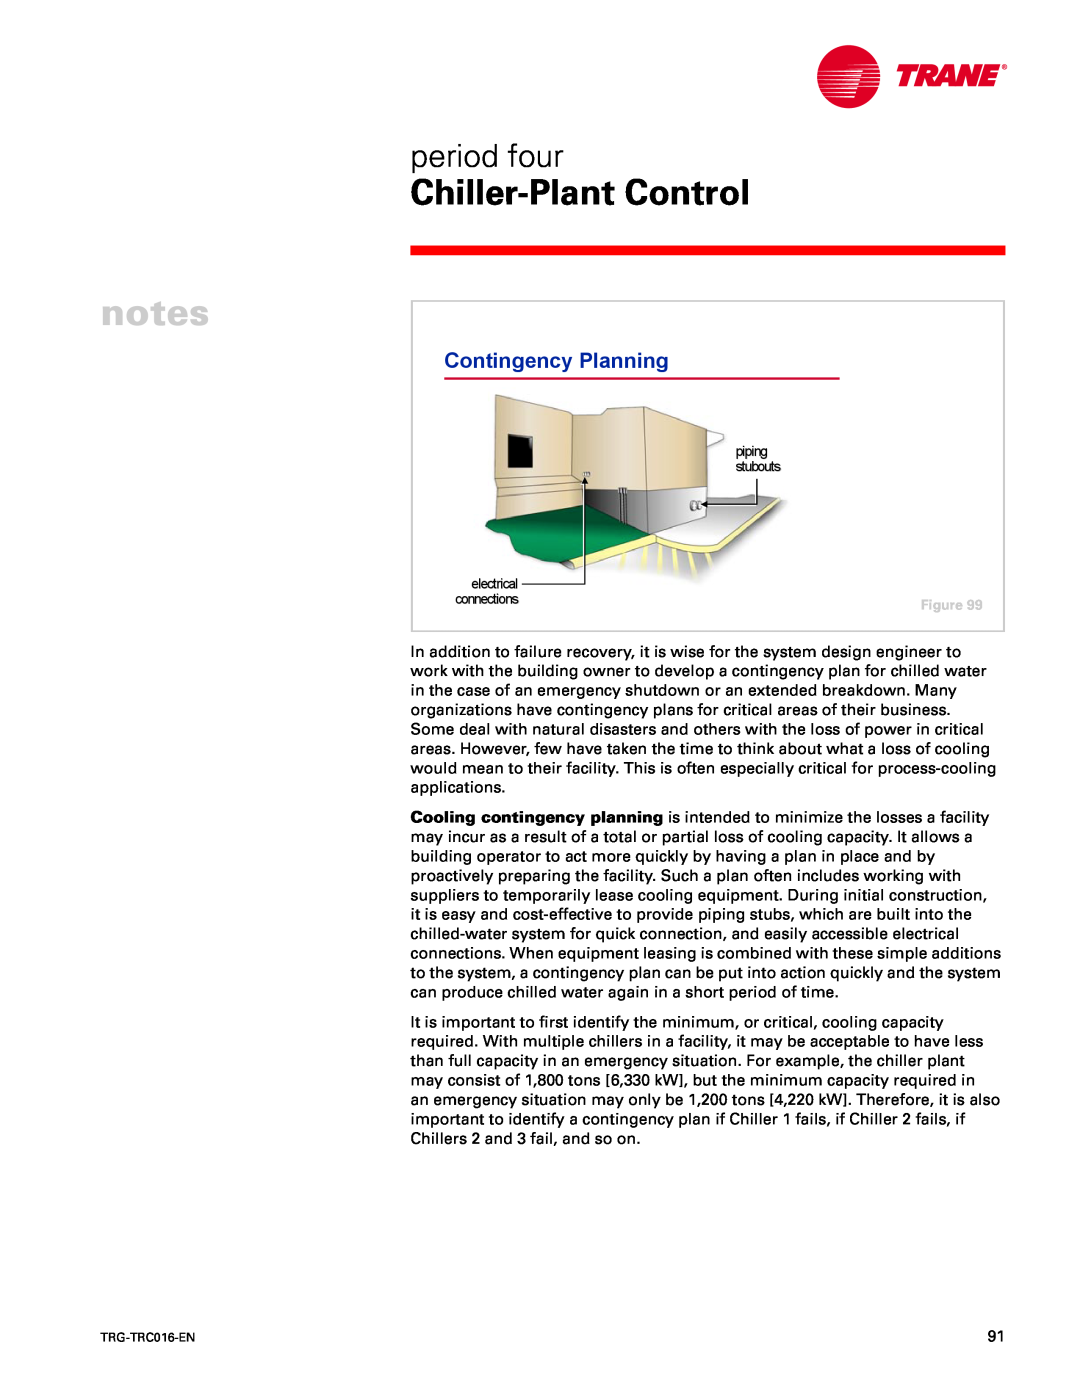 Trane TRG-TRC016-EN manual Contingency Planning, notes, Chiller-PlantControl, period four 